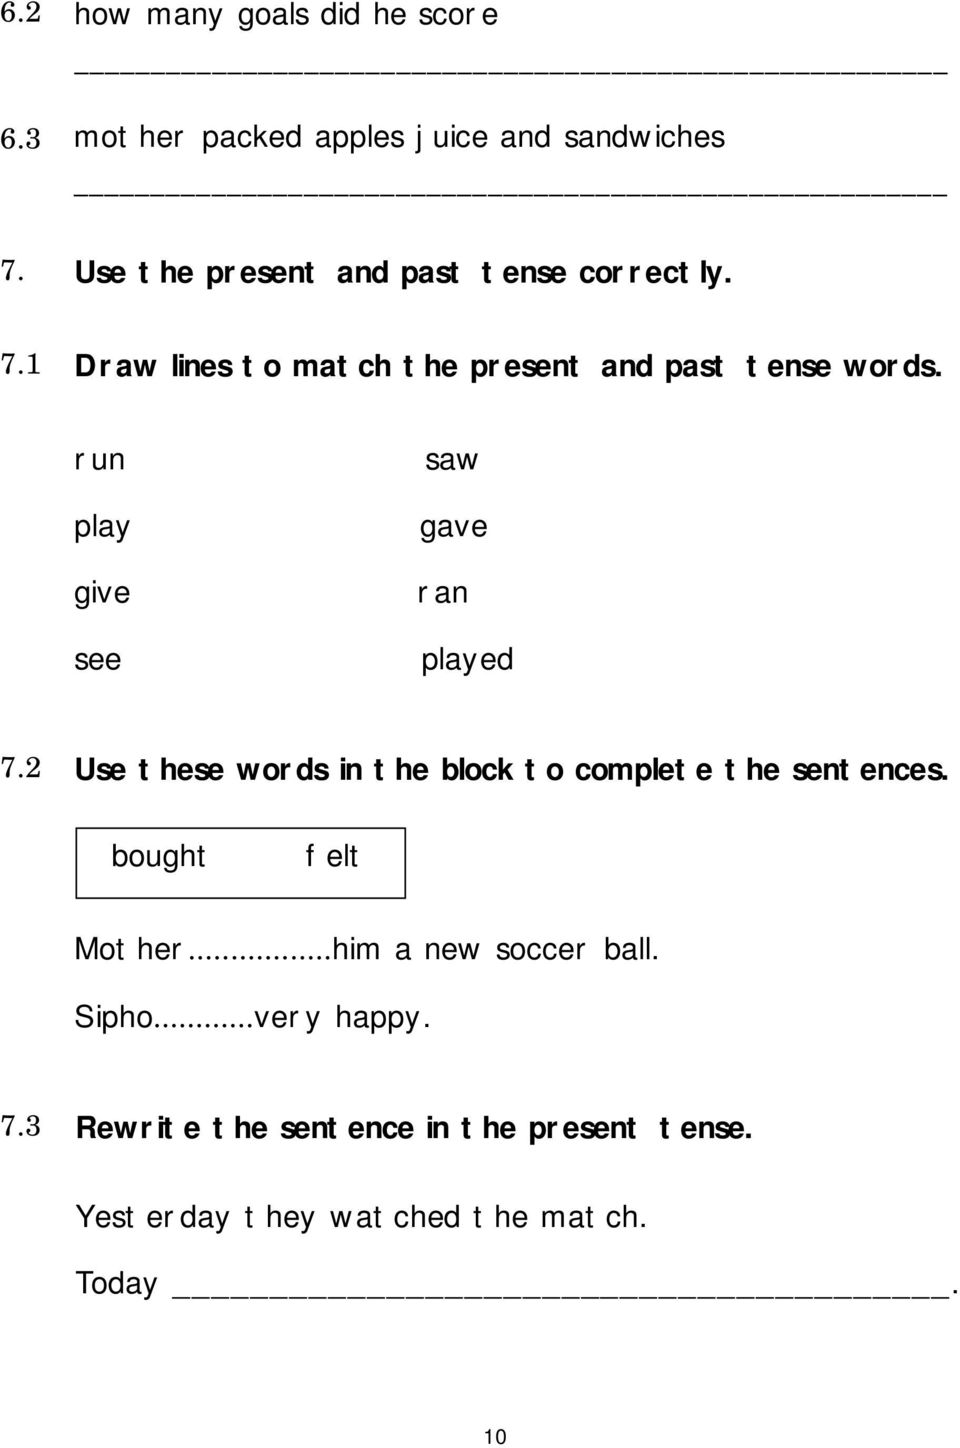 run play give see saw gave ran played 7.2 Use these words in the block to complete the sentences.